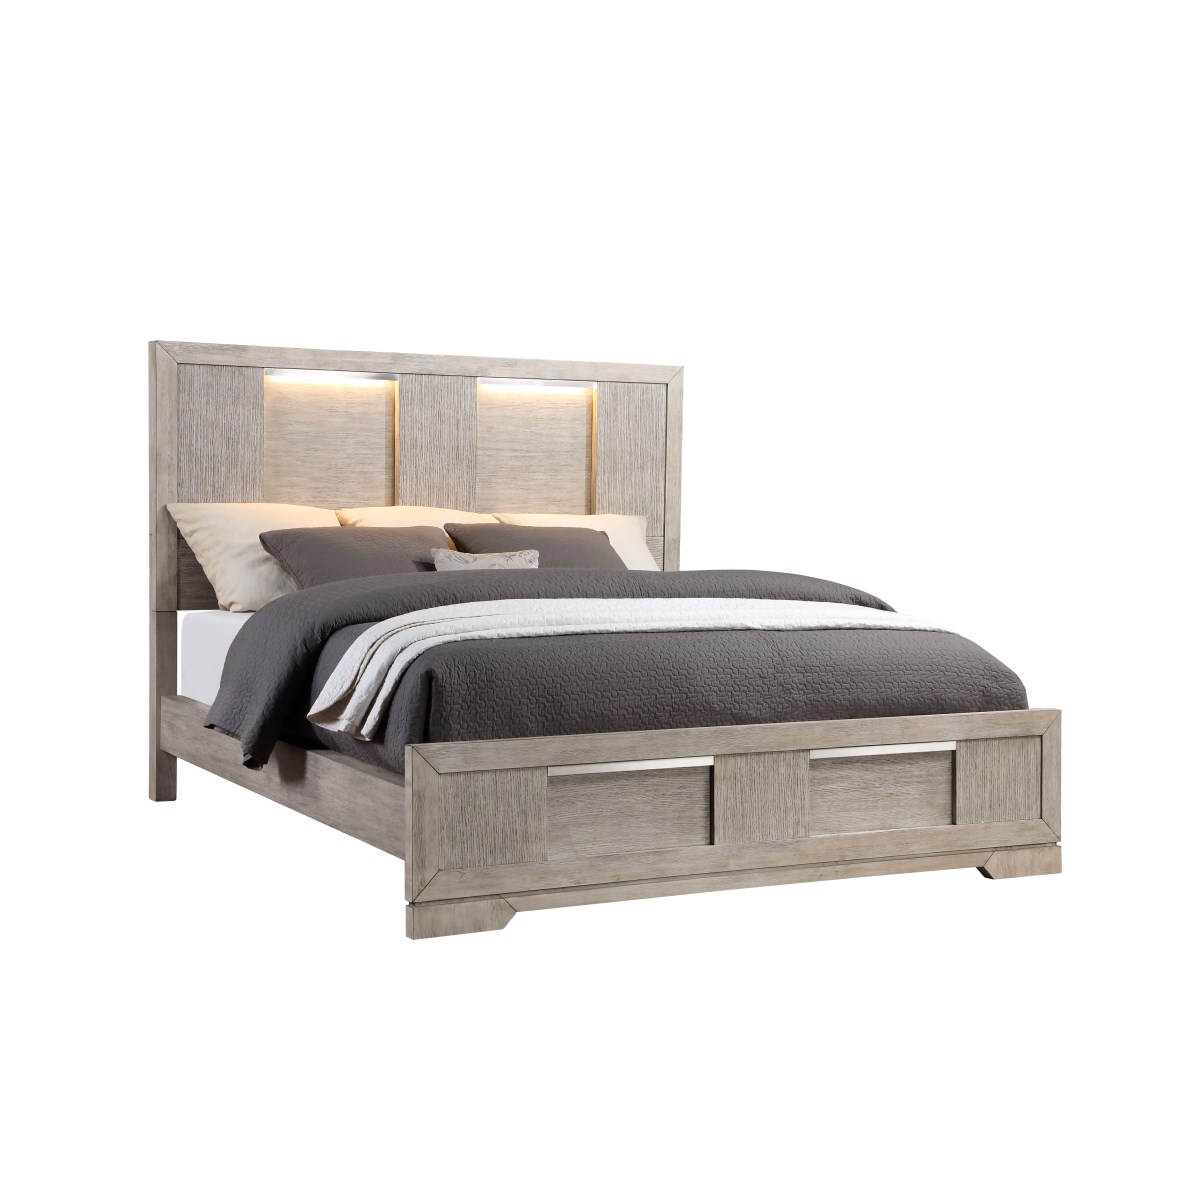 Austin Group Devon King Bed with Lighted Headboard